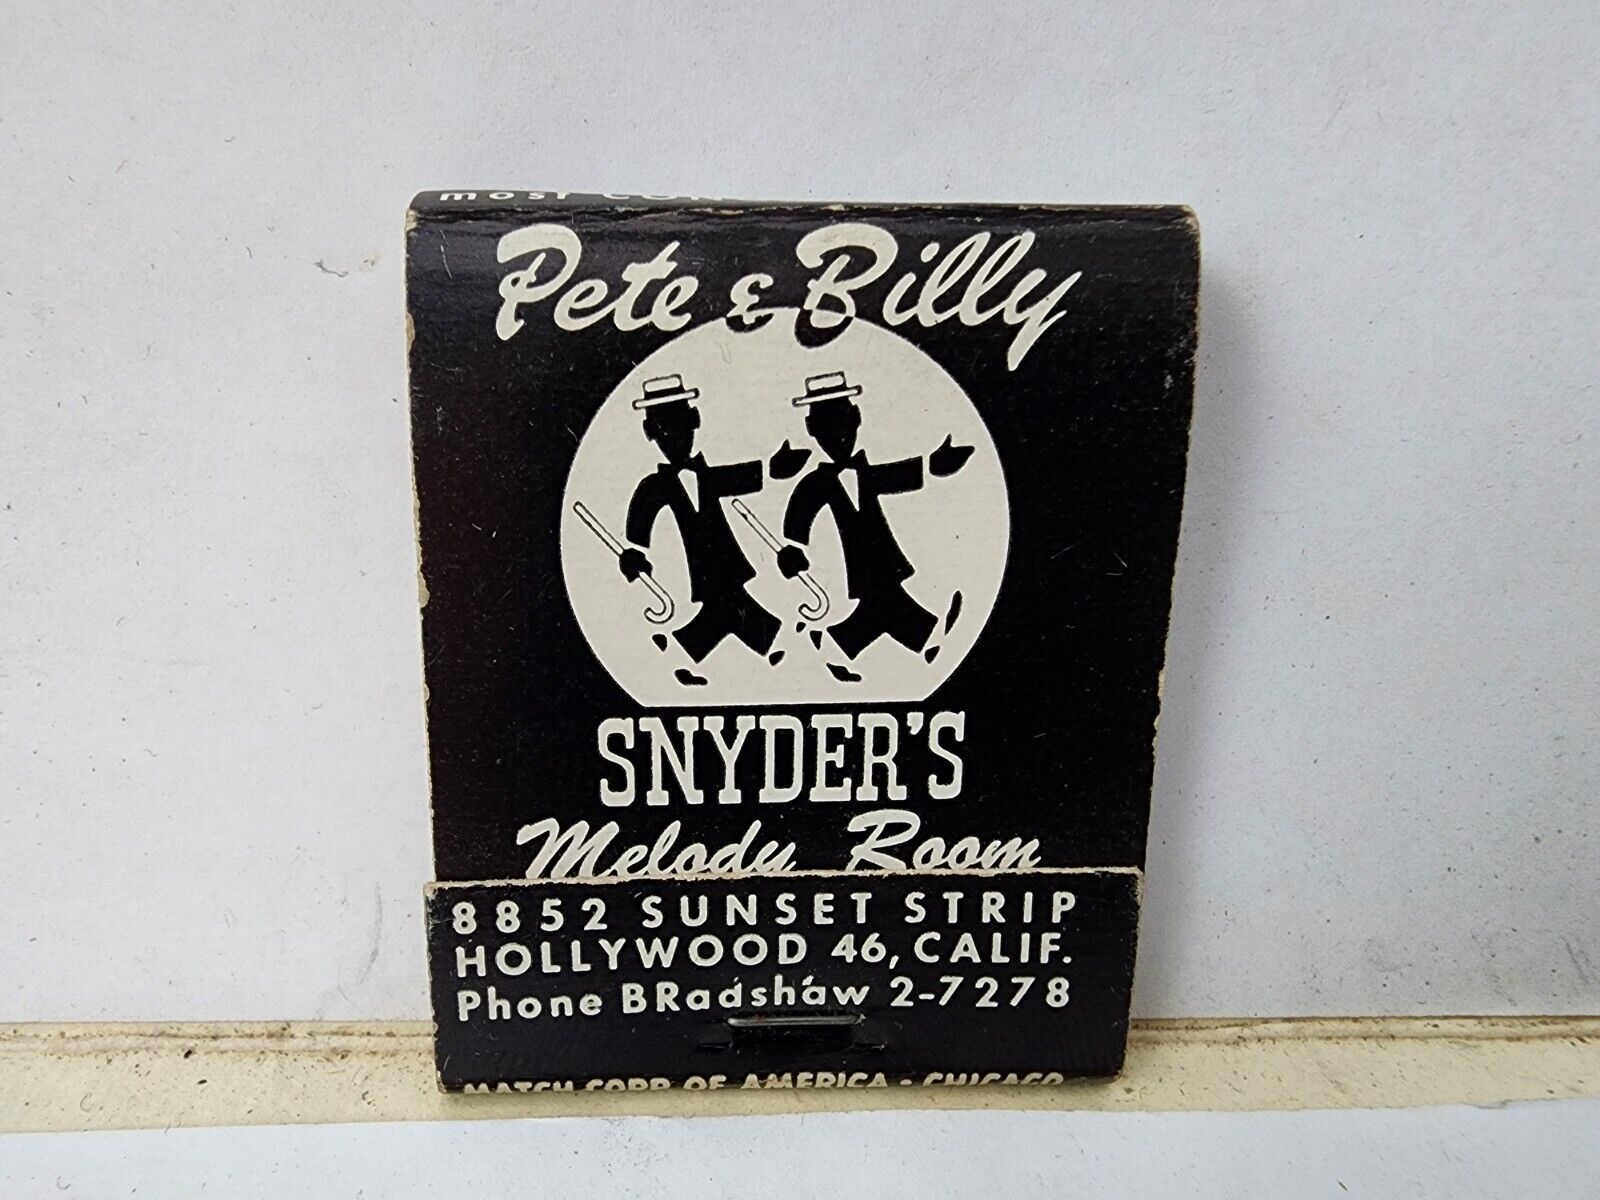 Rare Vintage Matchbook Cover - Pete & Billy Snyder's Melody Room Hollywood Viper